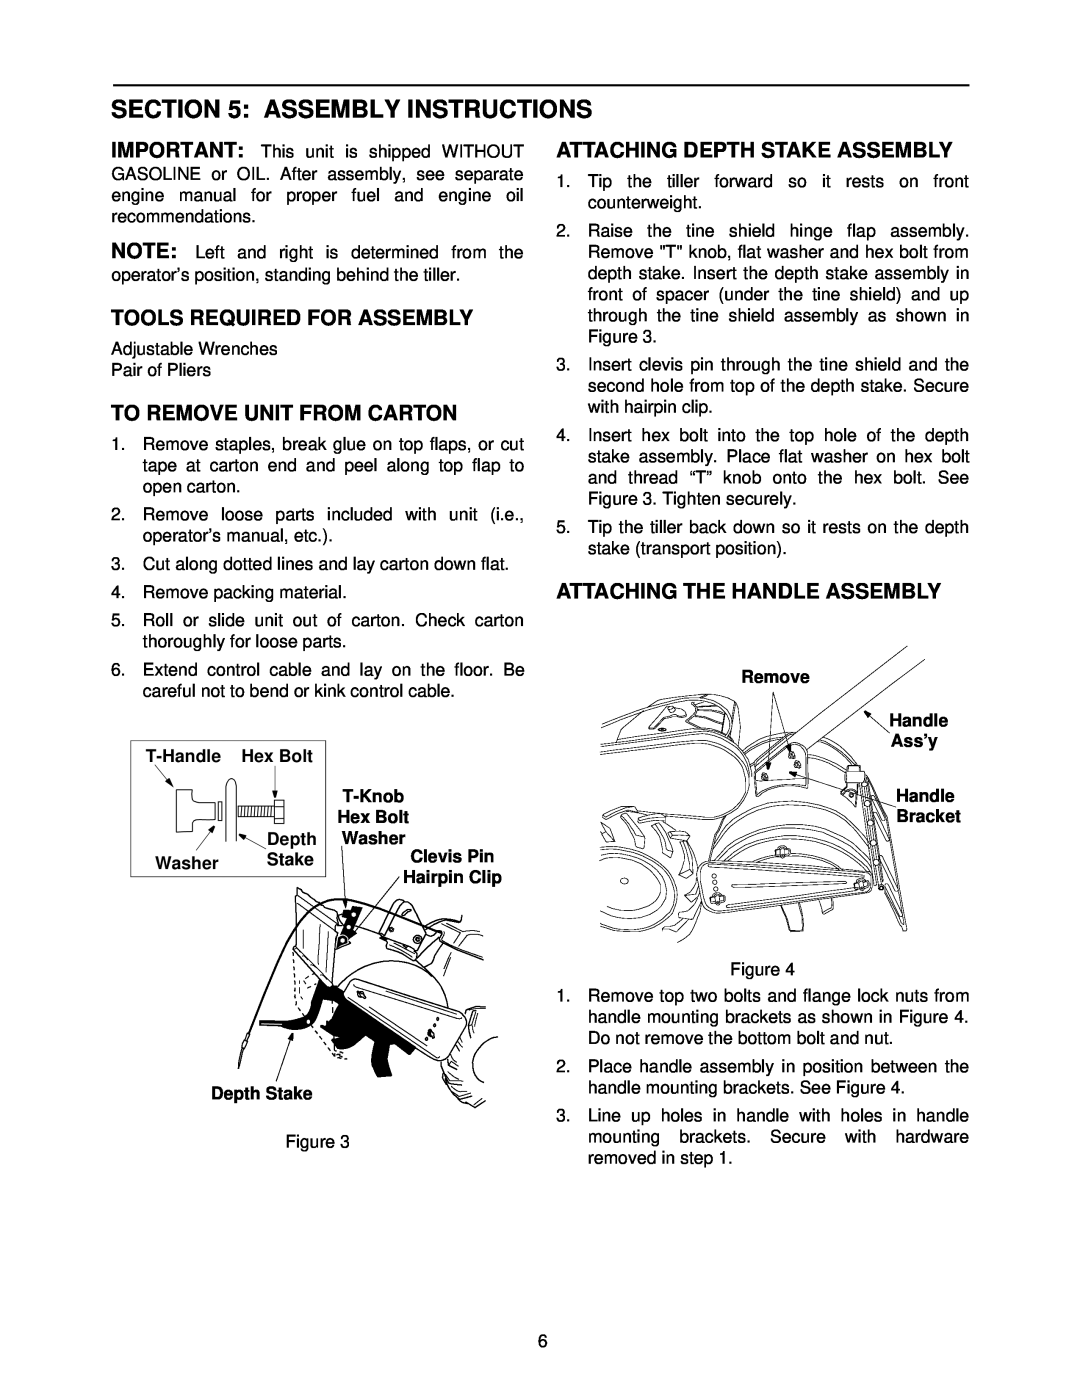 White 21A-458B190 manual Assembly Instructions, Tools Required For Assembly, To Remove Unit From Carton 